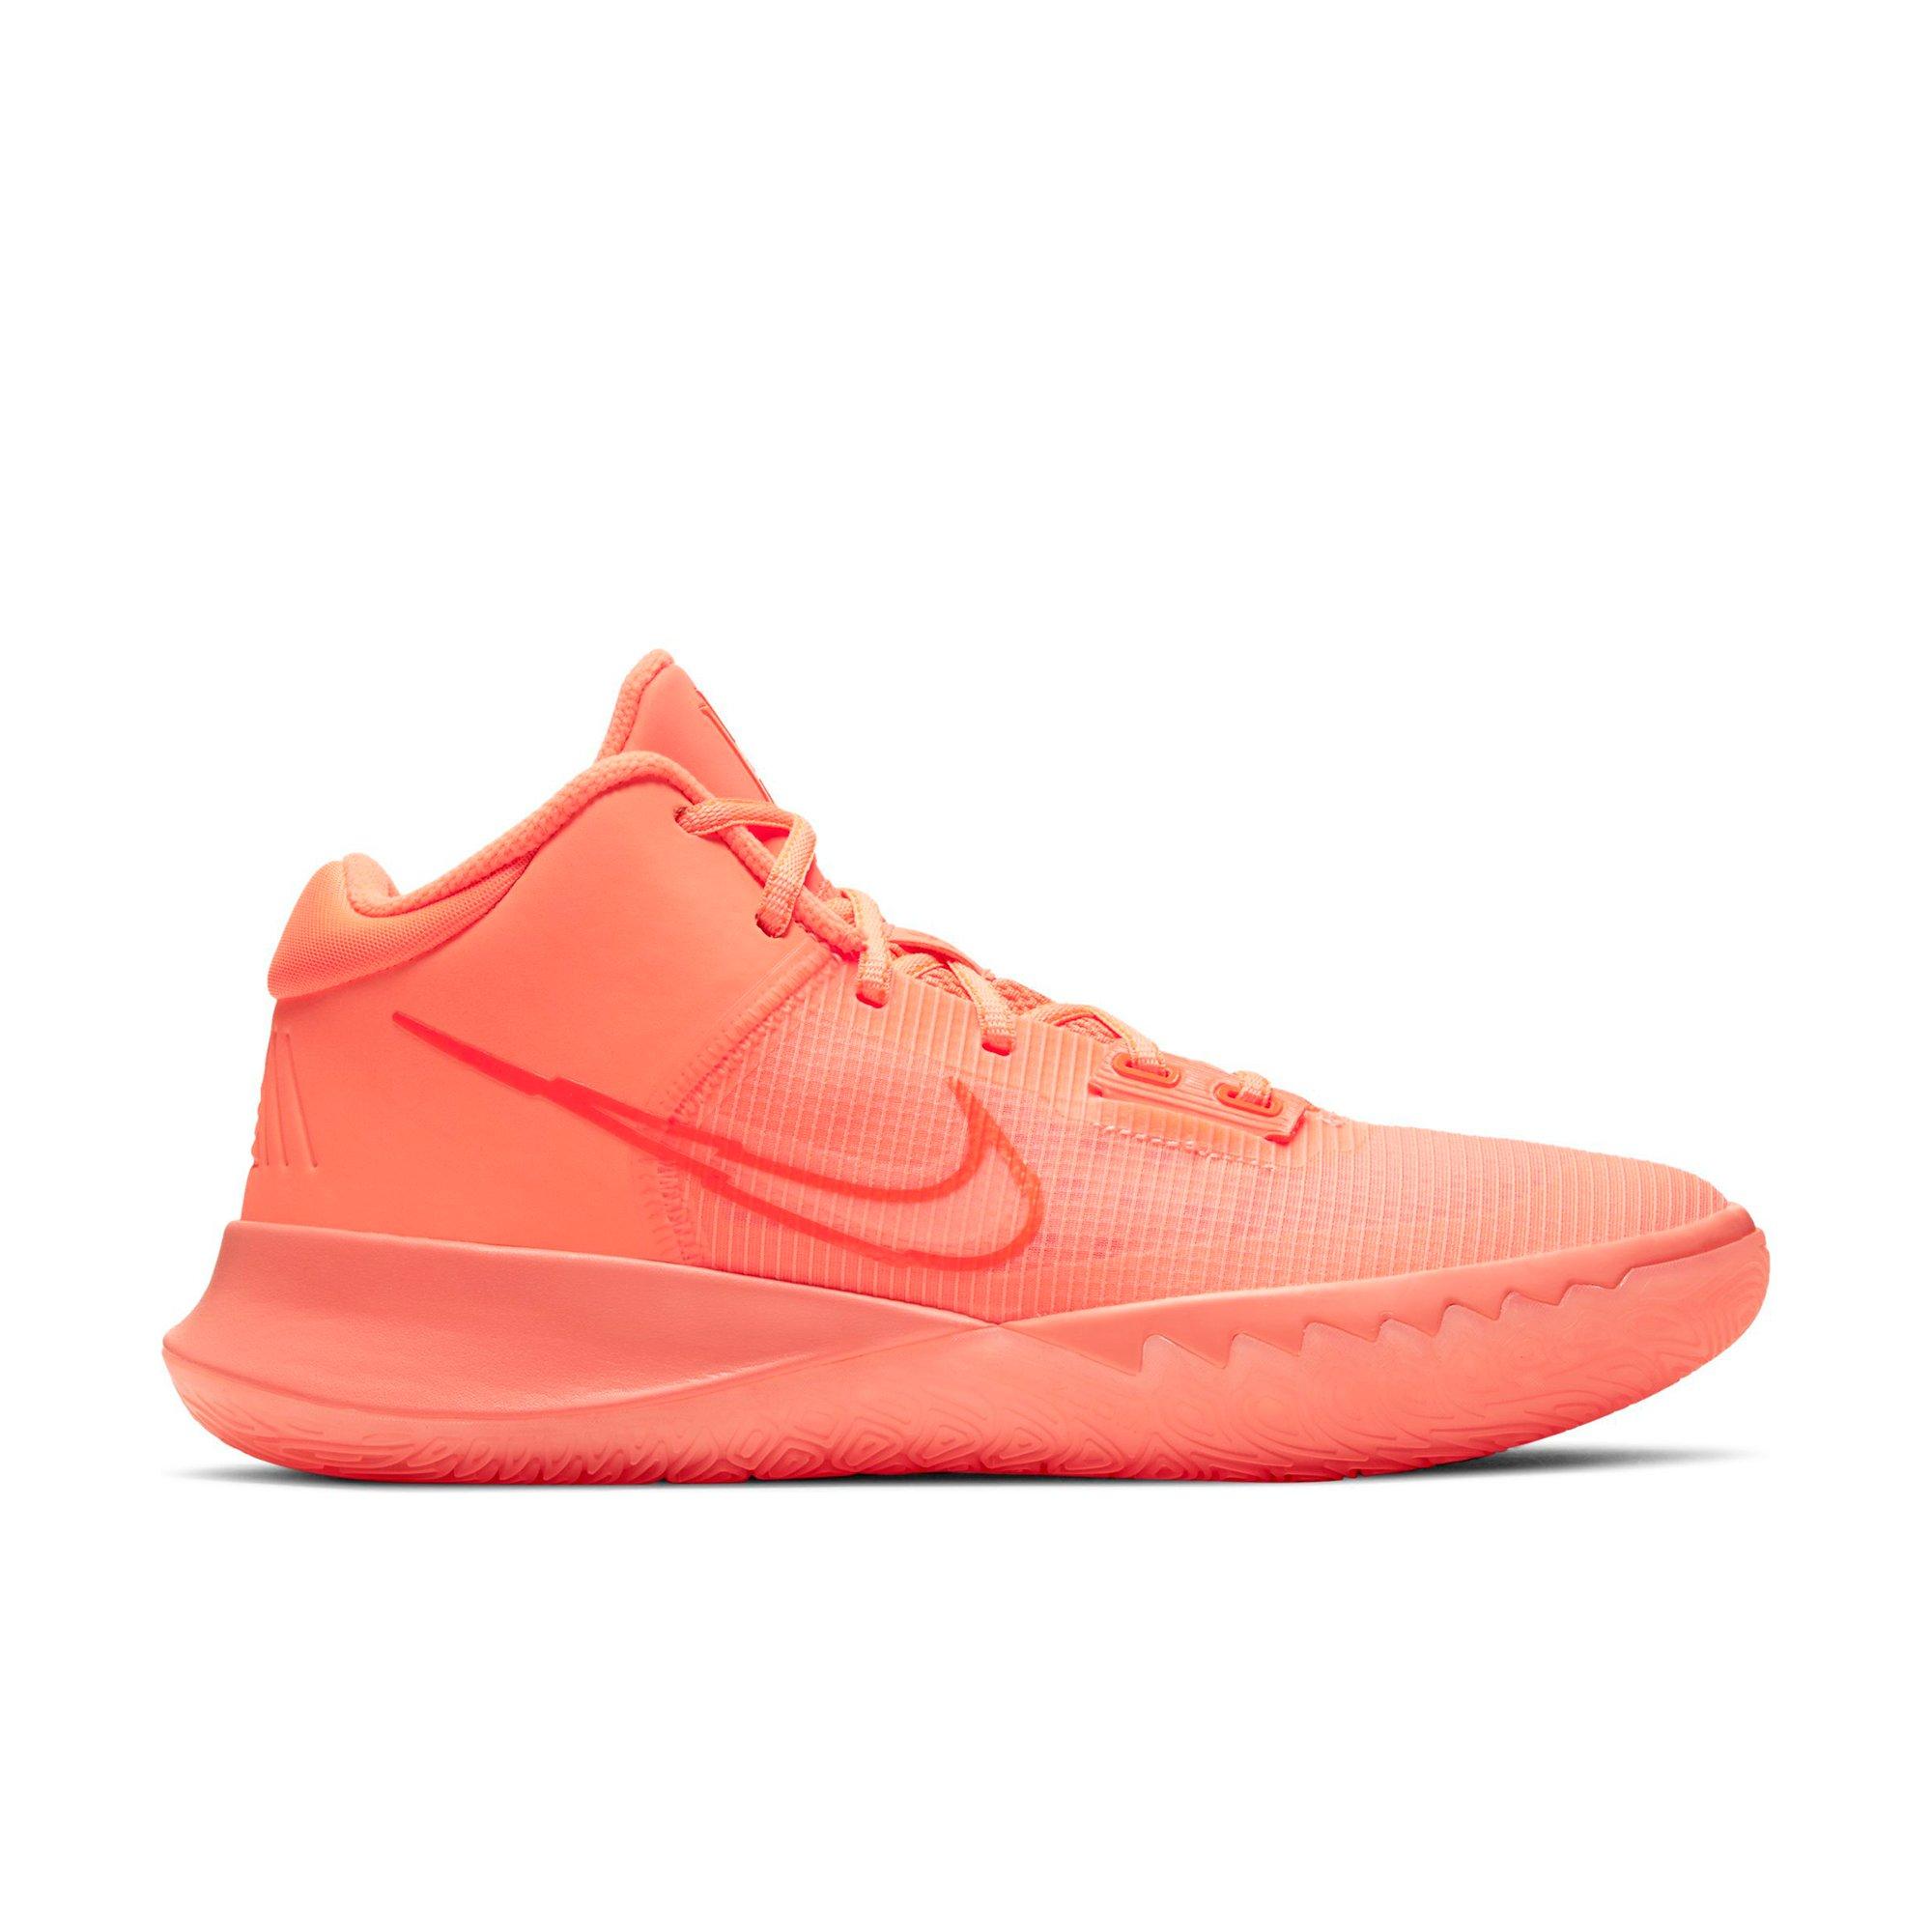 kyrie shoes high tops